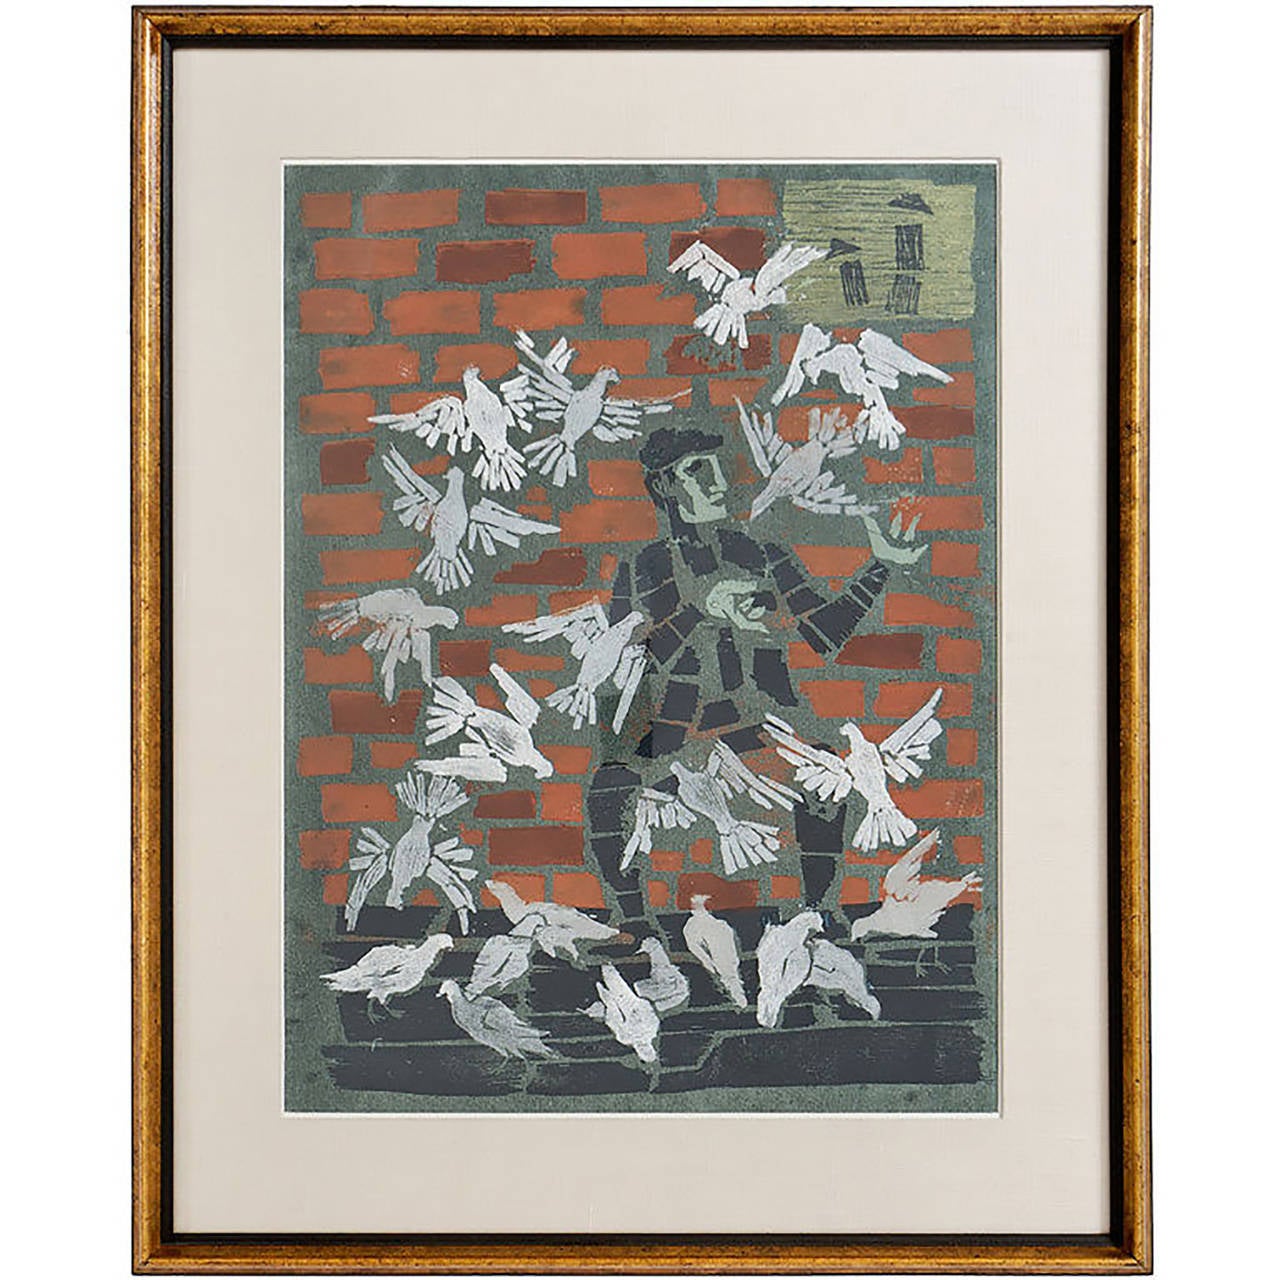 Graphic and colorful abstract print depicting an African-American man feeding pigeons in front of a brick building. Signed under the mat 